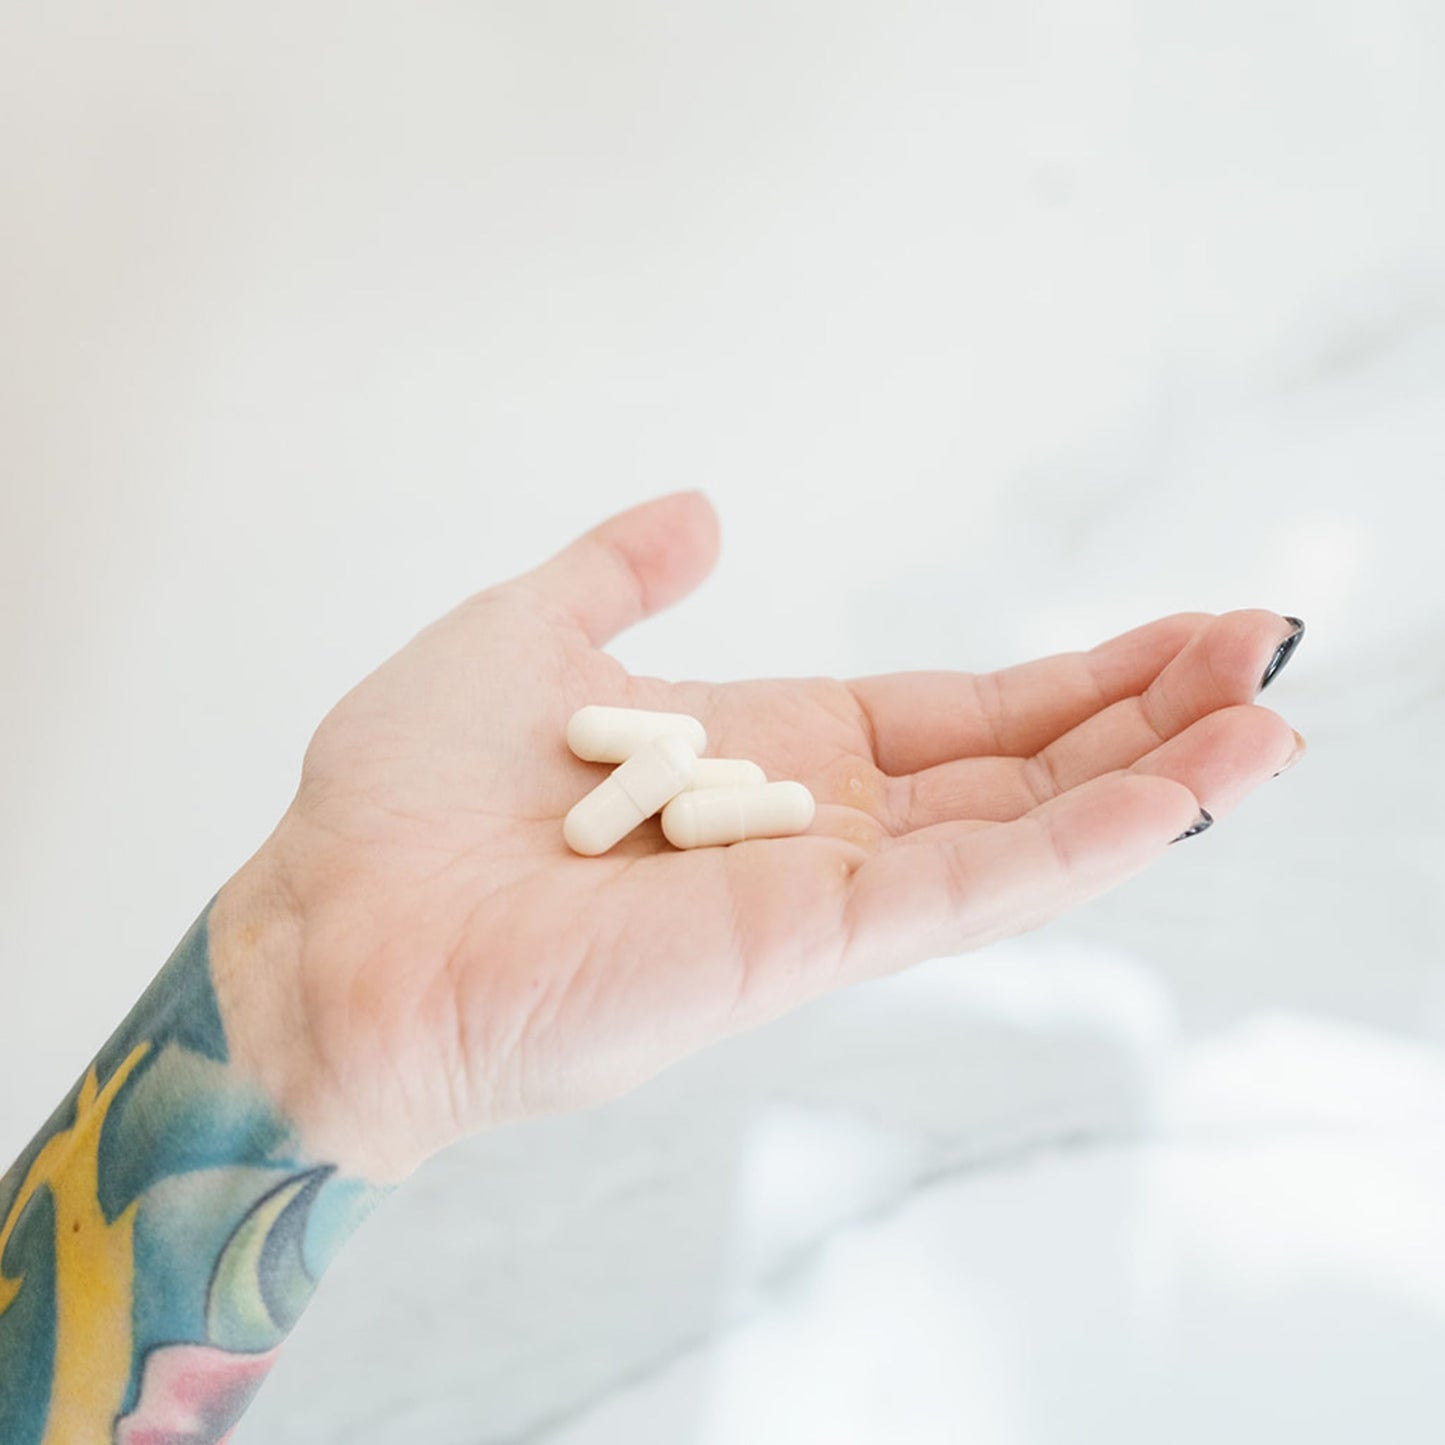 woman's hand with black nail polish and tattoos on forearm holding white capsules in palm.